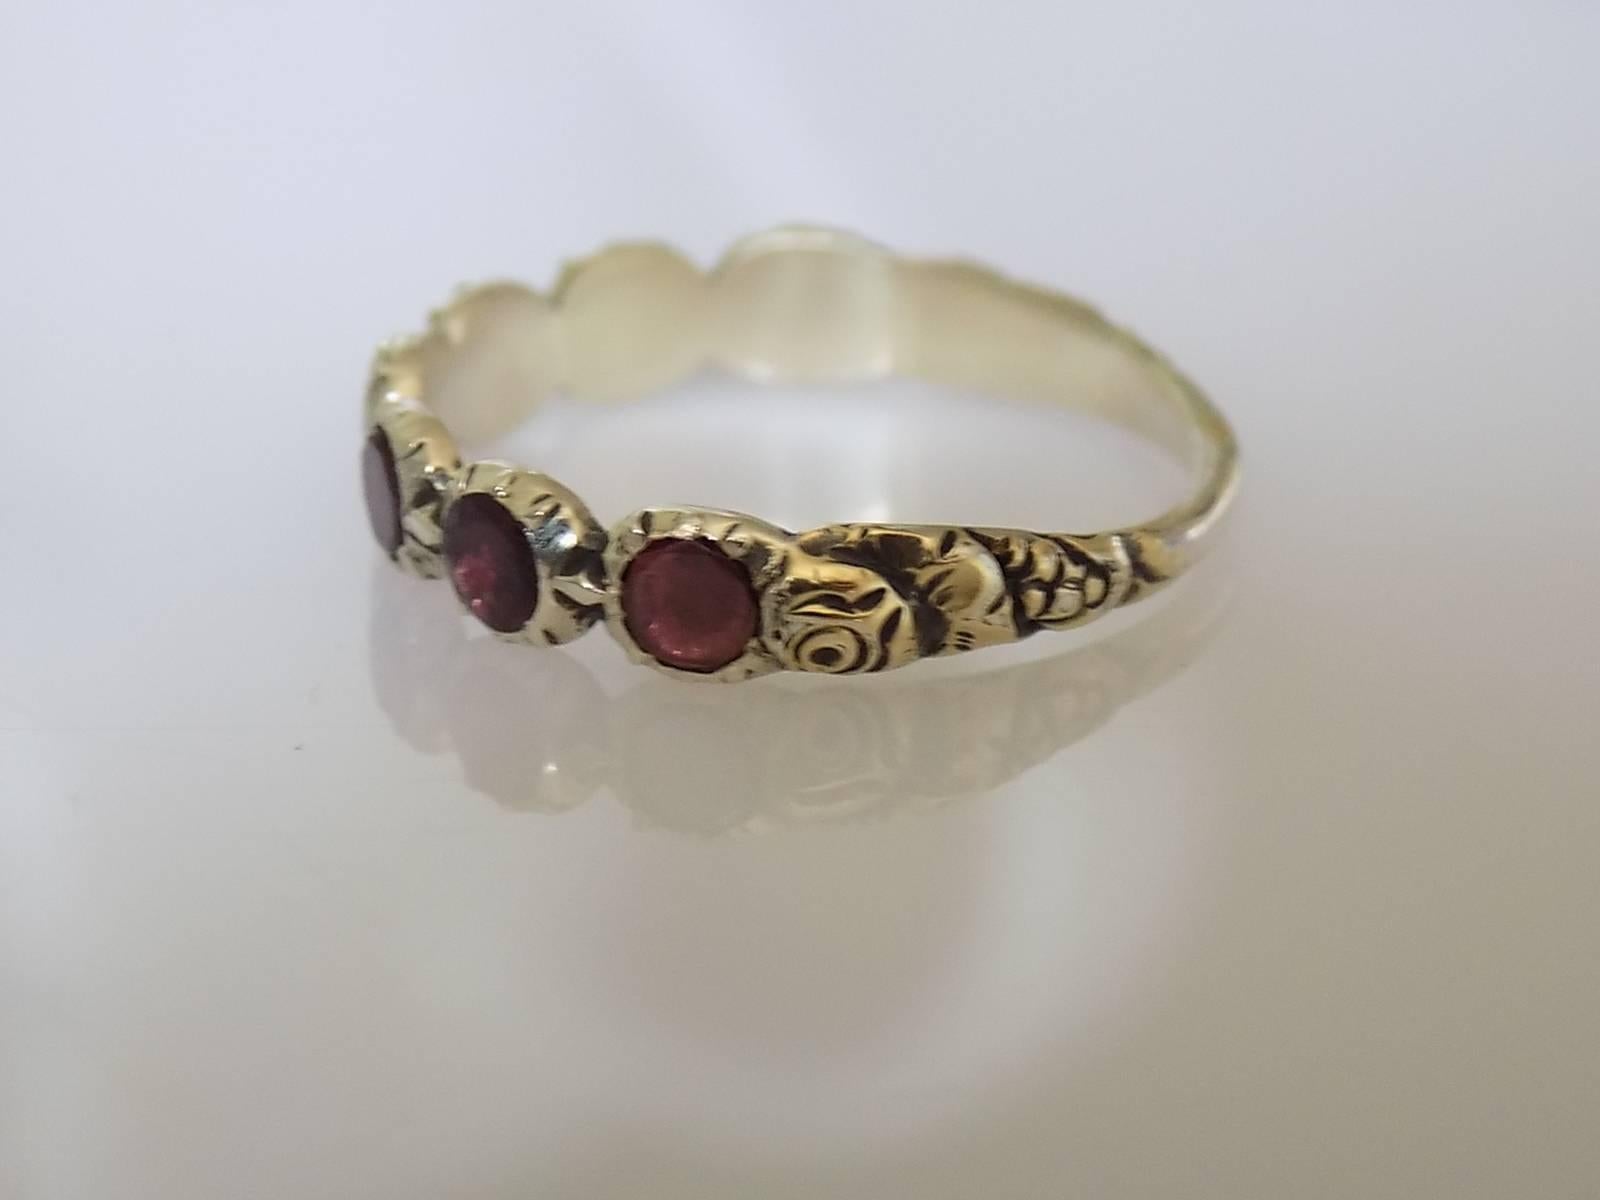 A Lovely Georgian 1700s Gold and seven flat cut Garnet half eternity Ring. Garnets in closed back settings on a beautifully carved with roses and berries shank. English origin. 

Size N 1/2 UK, 6.75 US.

Height of the face 4mm.

Unmarked,